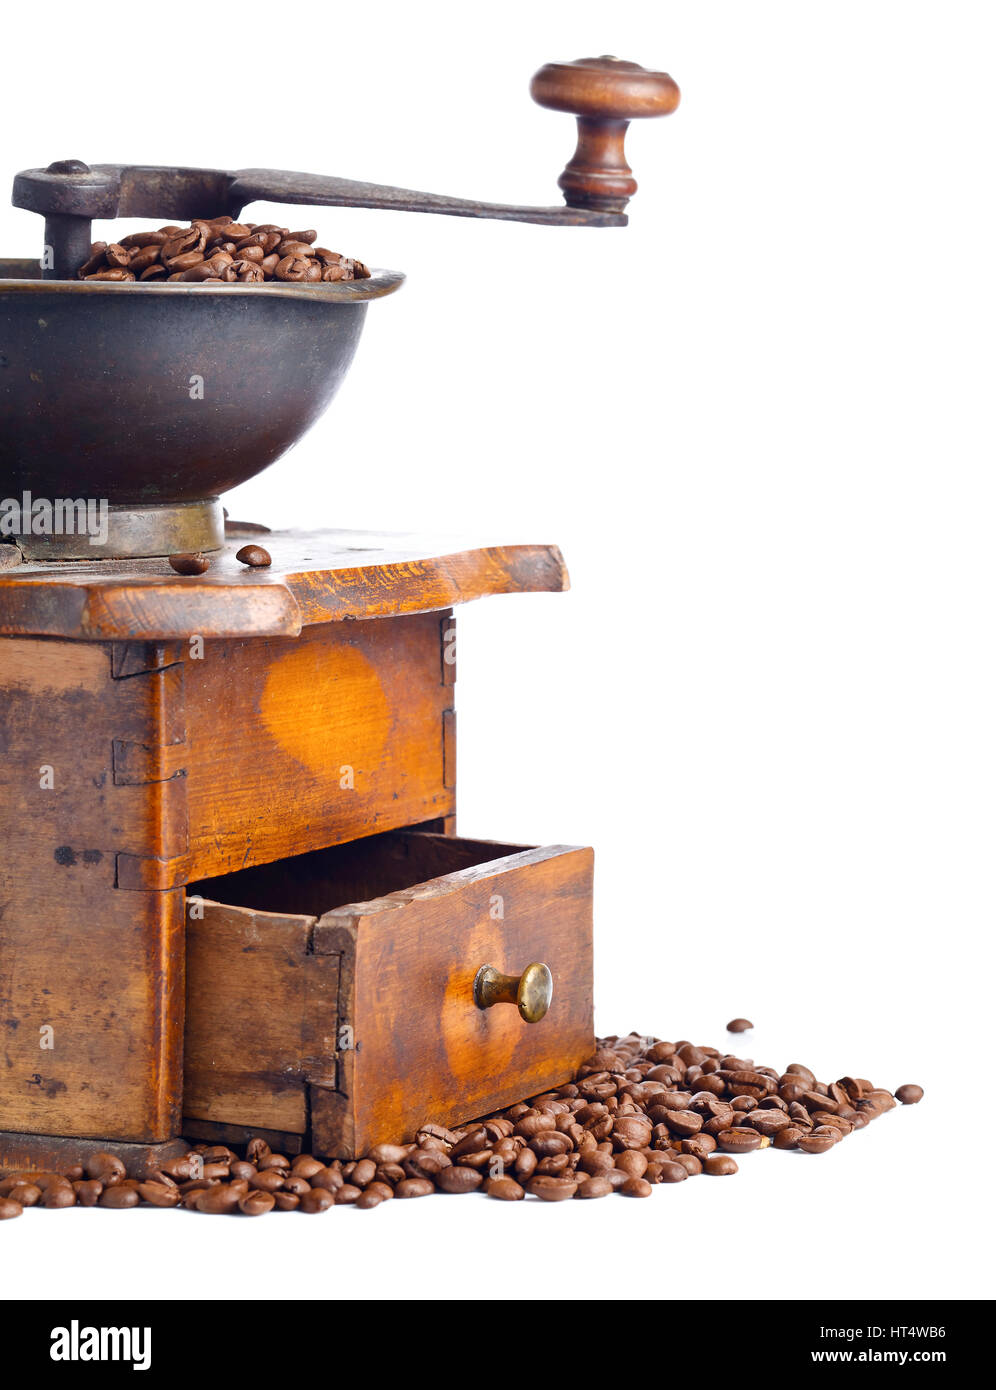 https://c8.alamy.com/comp/HT4WB6/old-coffee-grinder-and-roasted-coffee-beans-isolated-on-white-background-HT4WB6.jpg